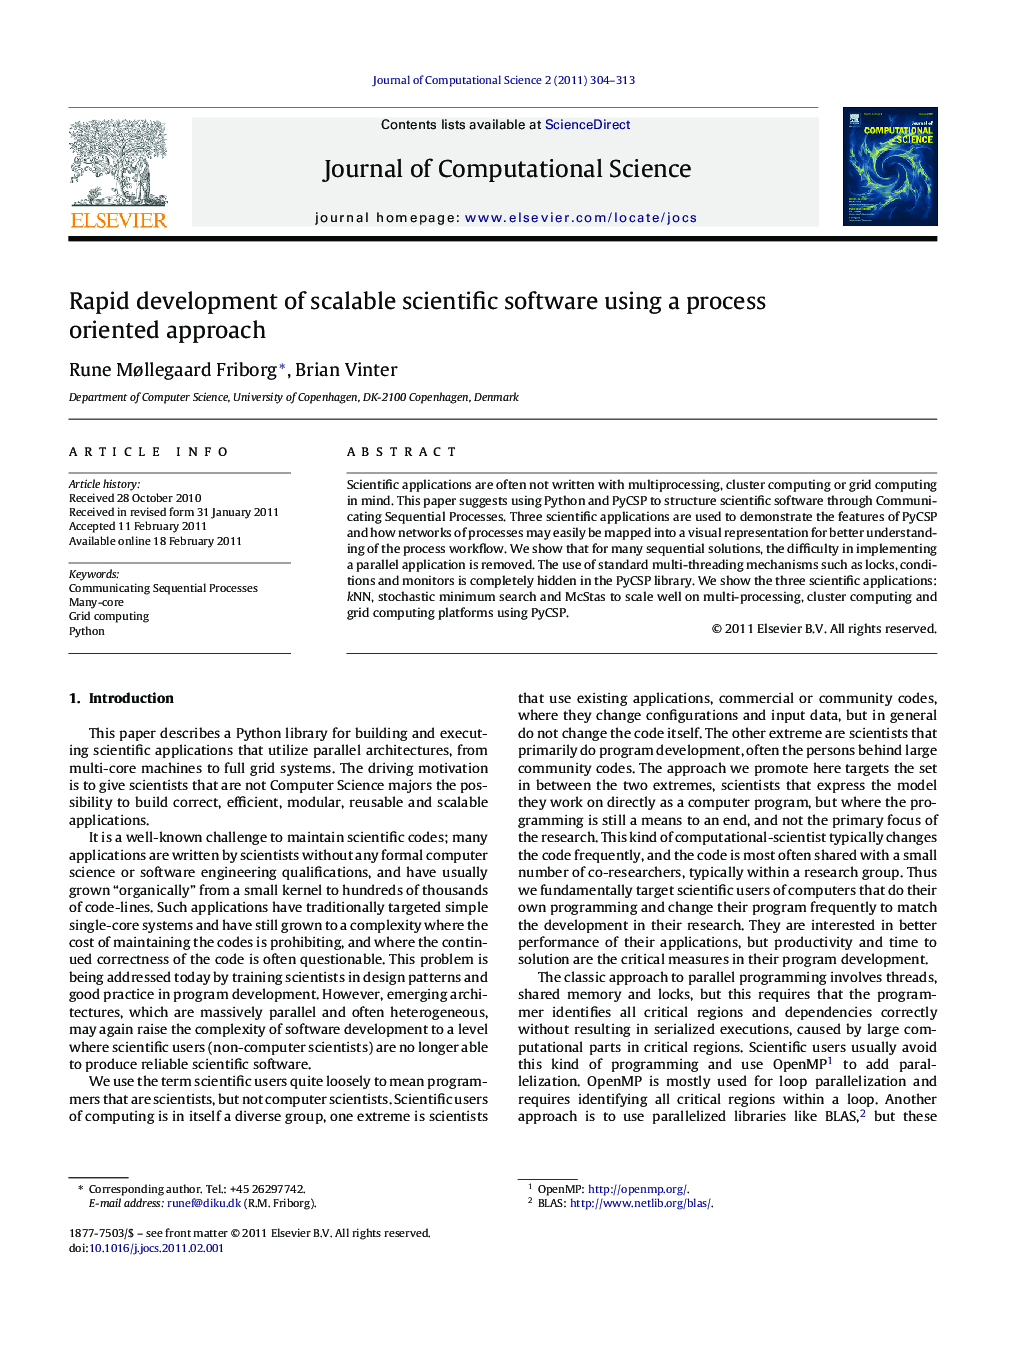 Rapid development of scalable scientific software using a process oriented approach